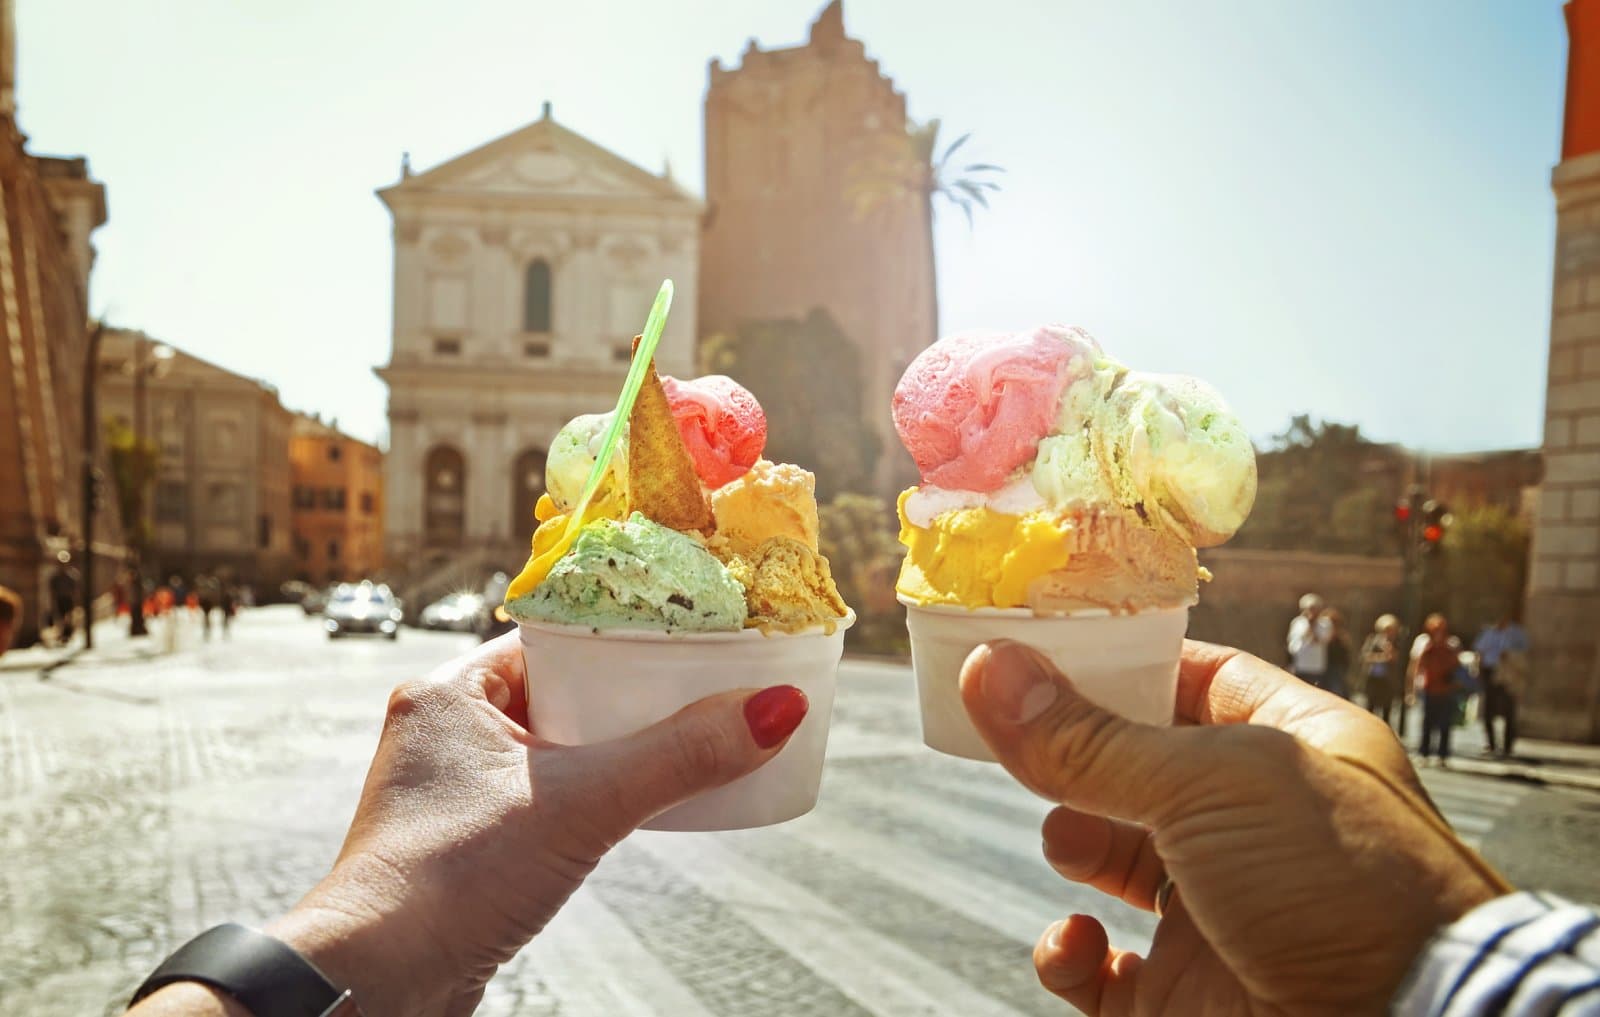 Image Credit: Shutterstock /natalia_maroz <p><span>No journey to Italy is complete without indulging in the heavenly delights of gelato. Treat yourself to scoops of creamy gelato in an array of tempting flavors, from classic pistachio and creamy stracciatella to tangy lemon and decadent hazelnut. Let each spoonful transport you to a state of pure bliss as you relish in the sweetness of life.</span></p>